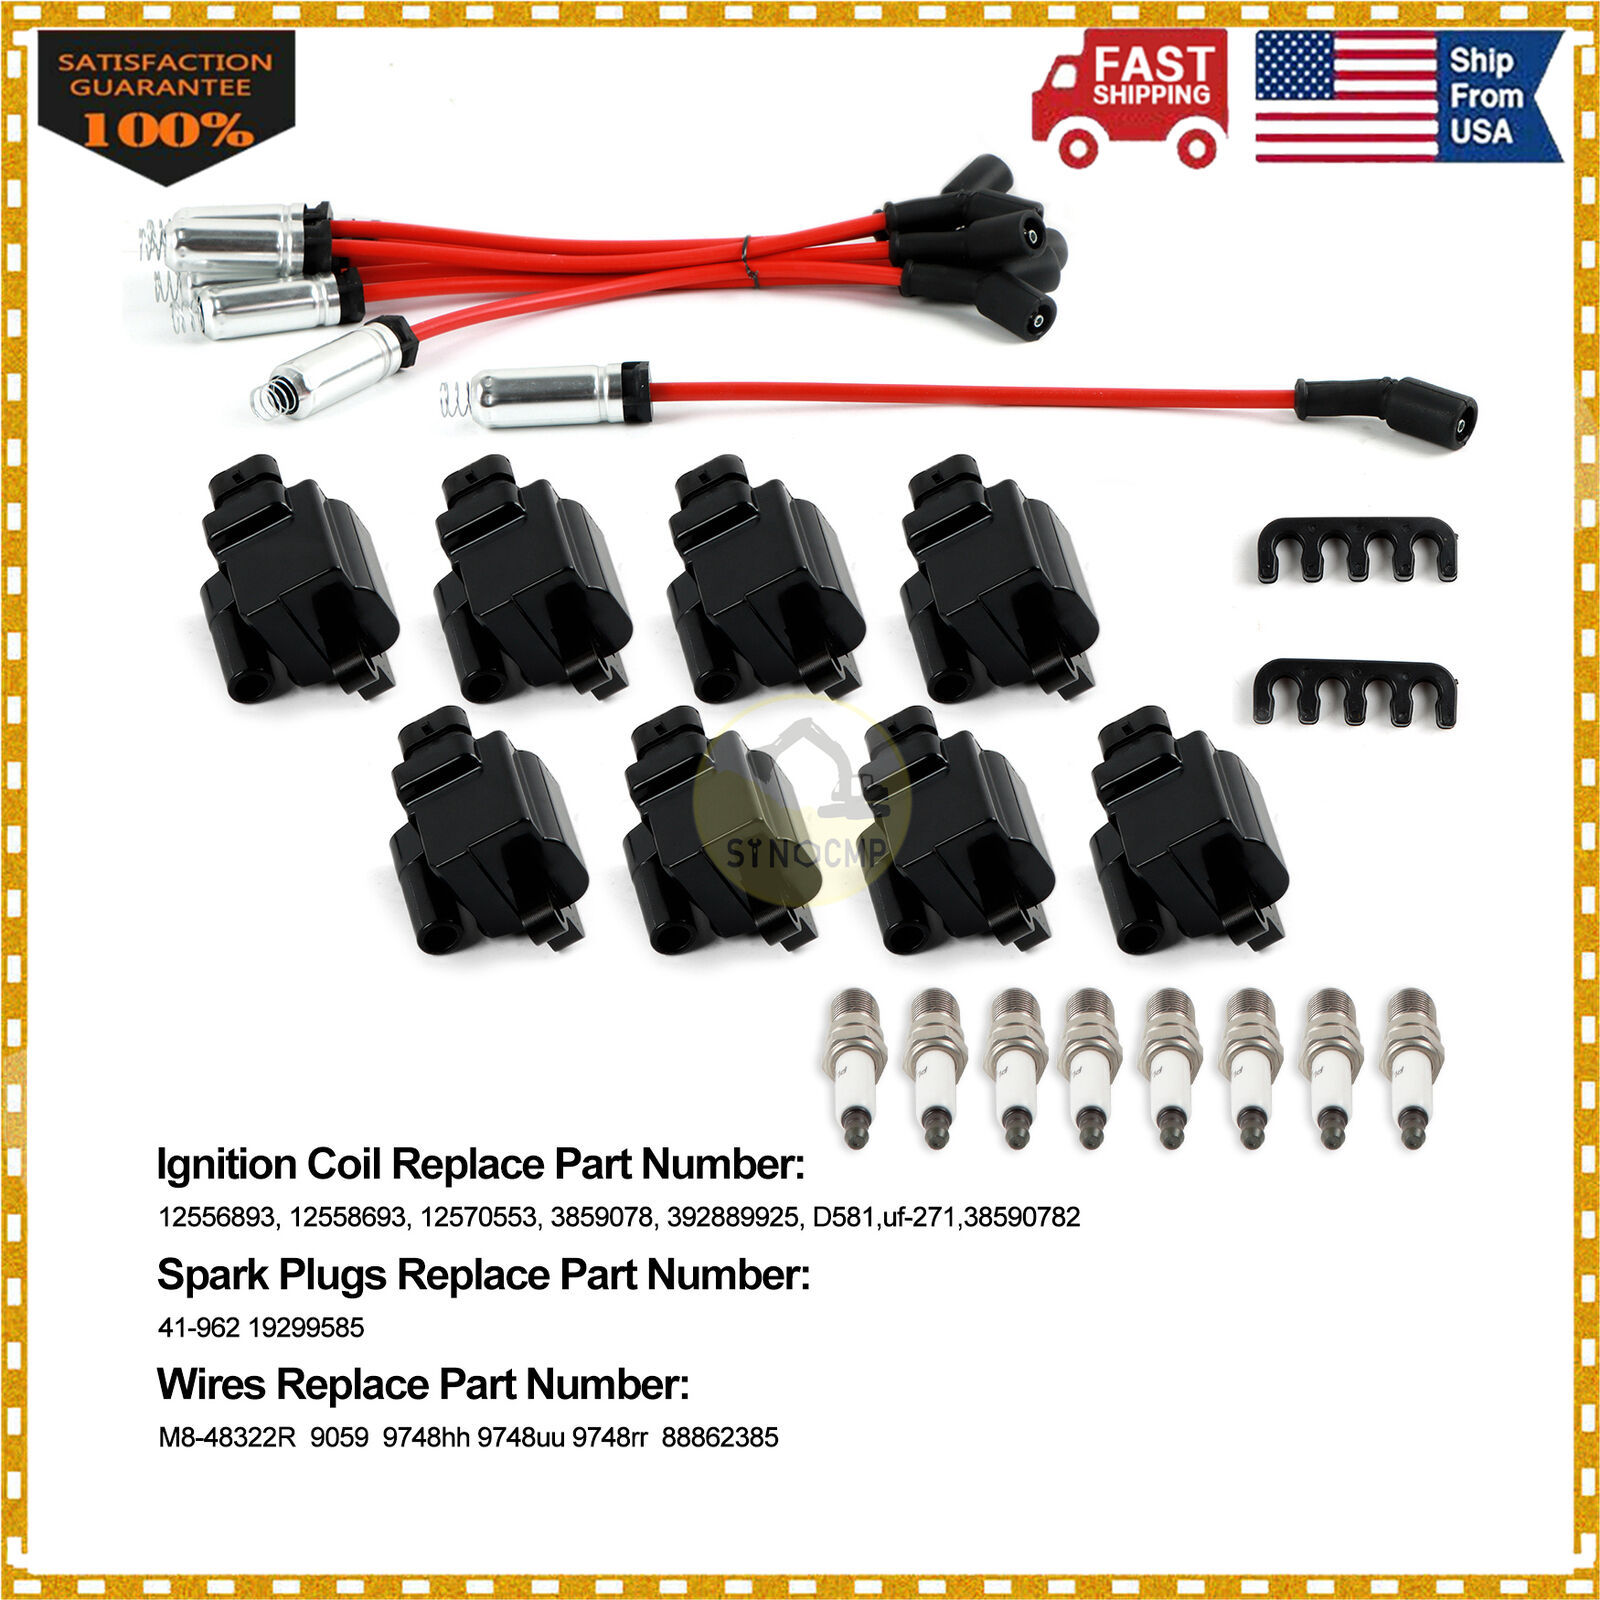 8Pack Ignition Coils & Spark Plugs & Wires For Chevy 4.8L 5.3L 6.0L 8.1L UF271